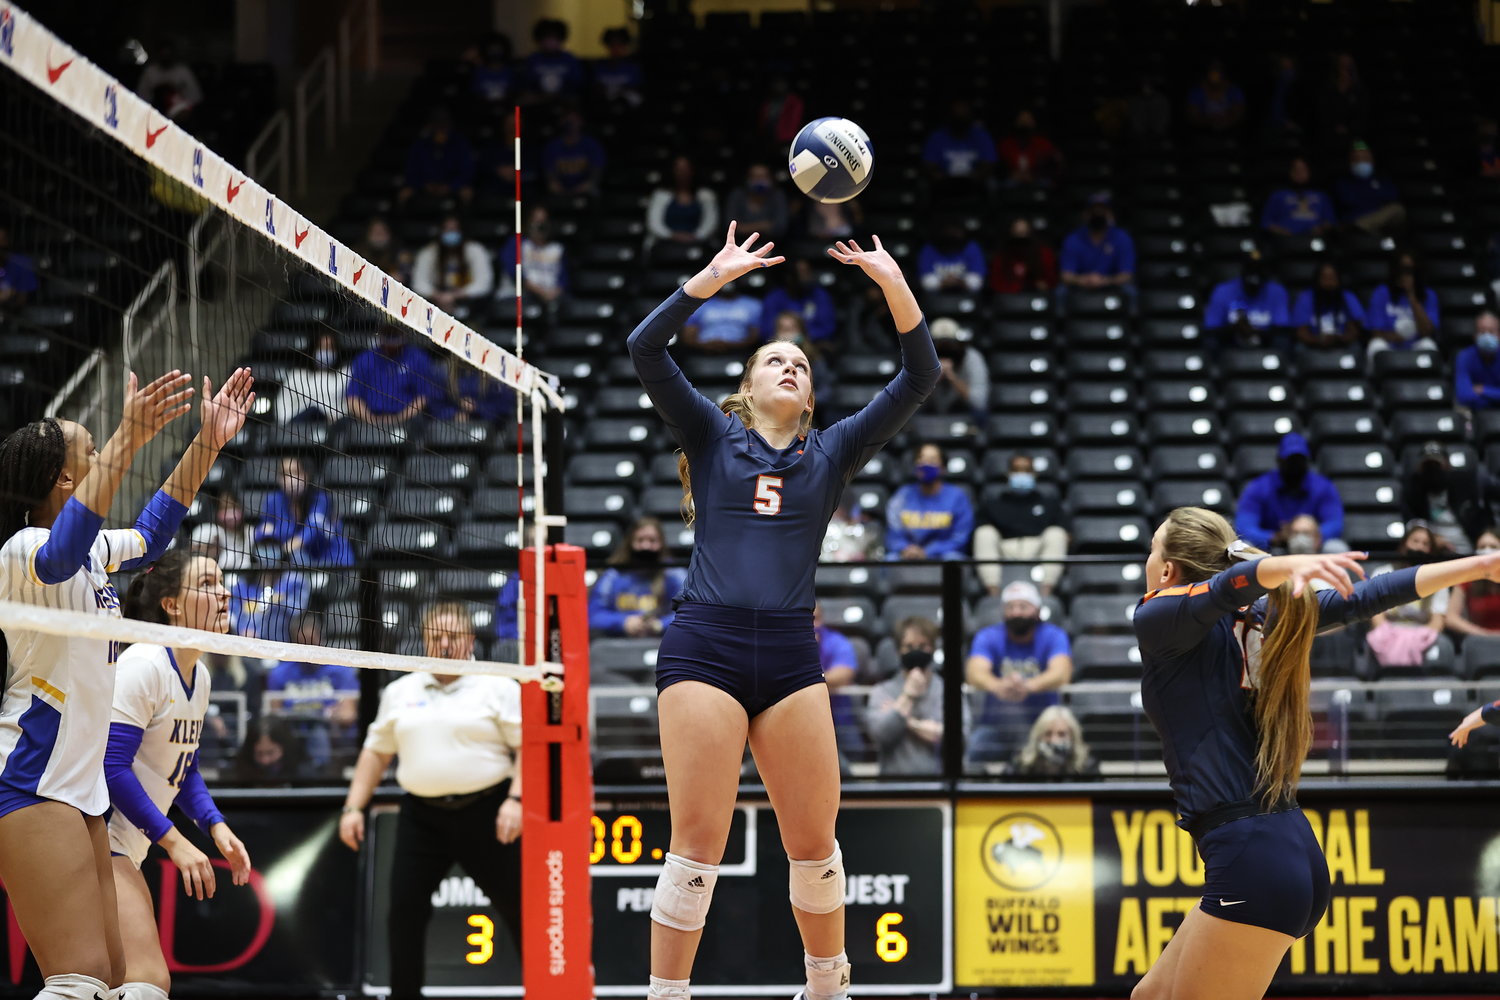 Seven Lakes junior setter Casey Batenhorst places the ball for an attack during the Spartans' Class 6A state championship match over Klein on Dec. 12 at the Culwell Center in Garland.